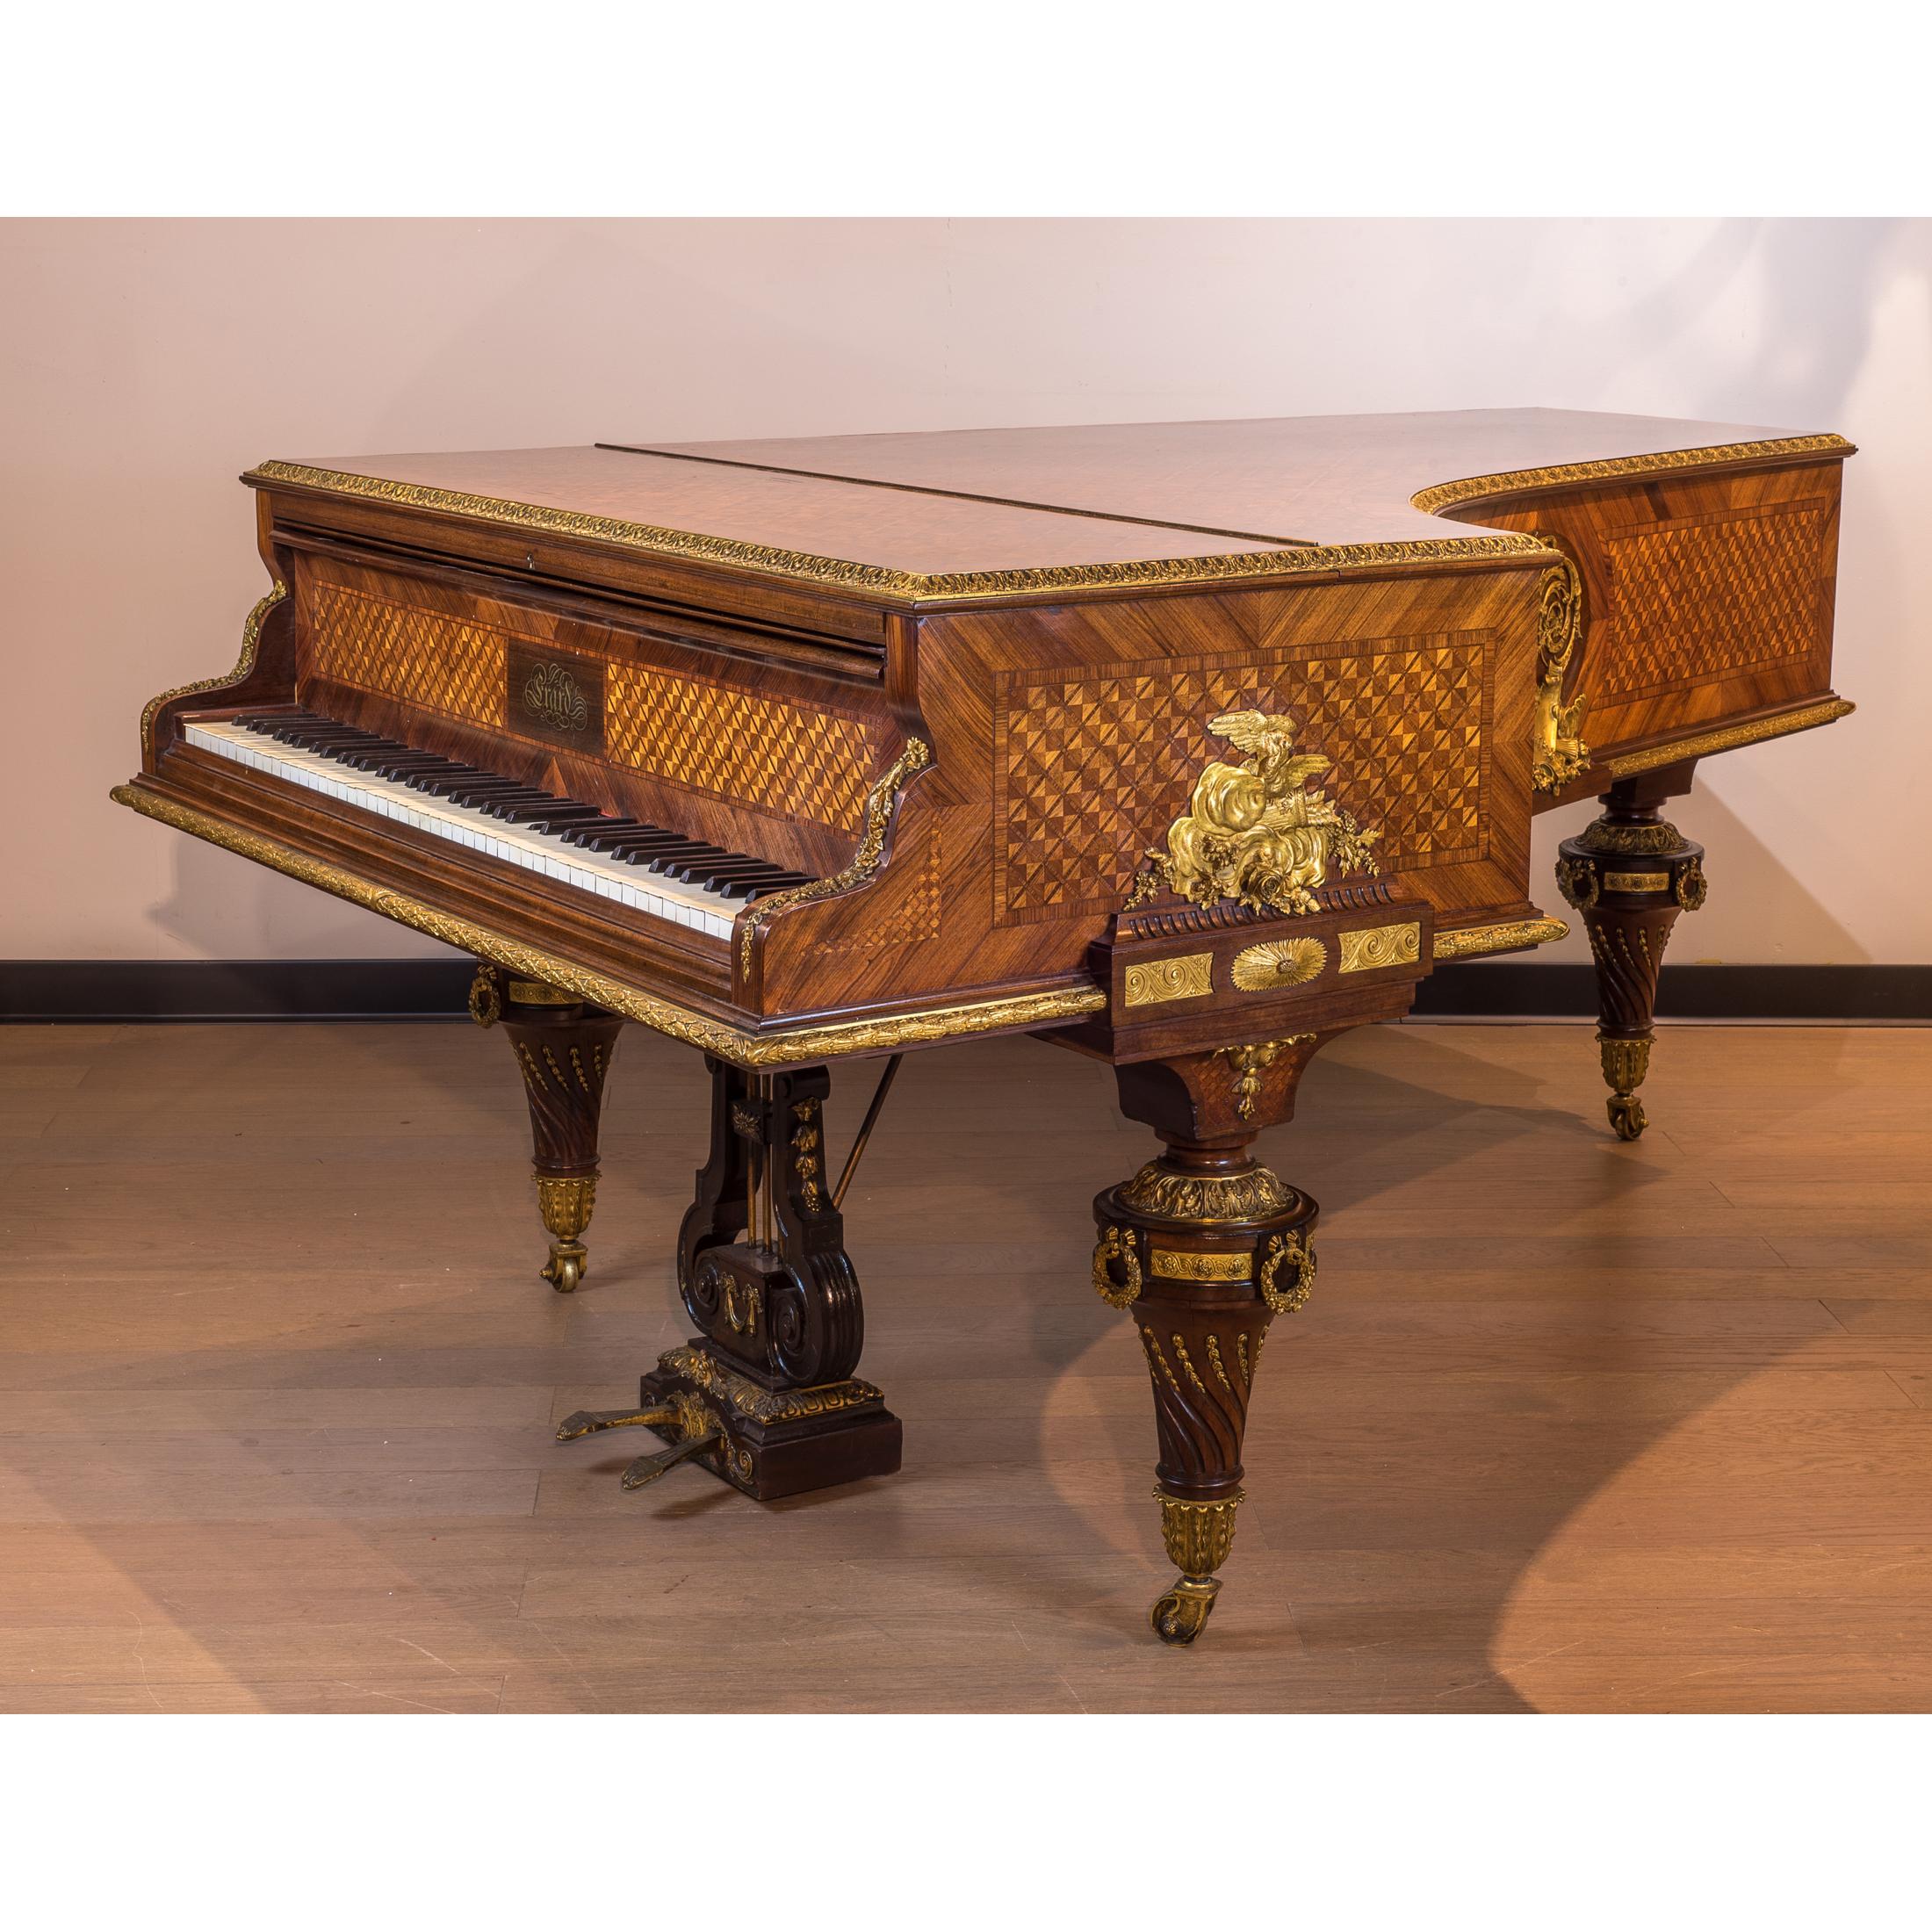 Louis XVI Important Ormolu-Mounted Amaranth, Kingwood and Satine Parquetry Grand Piano For Sale